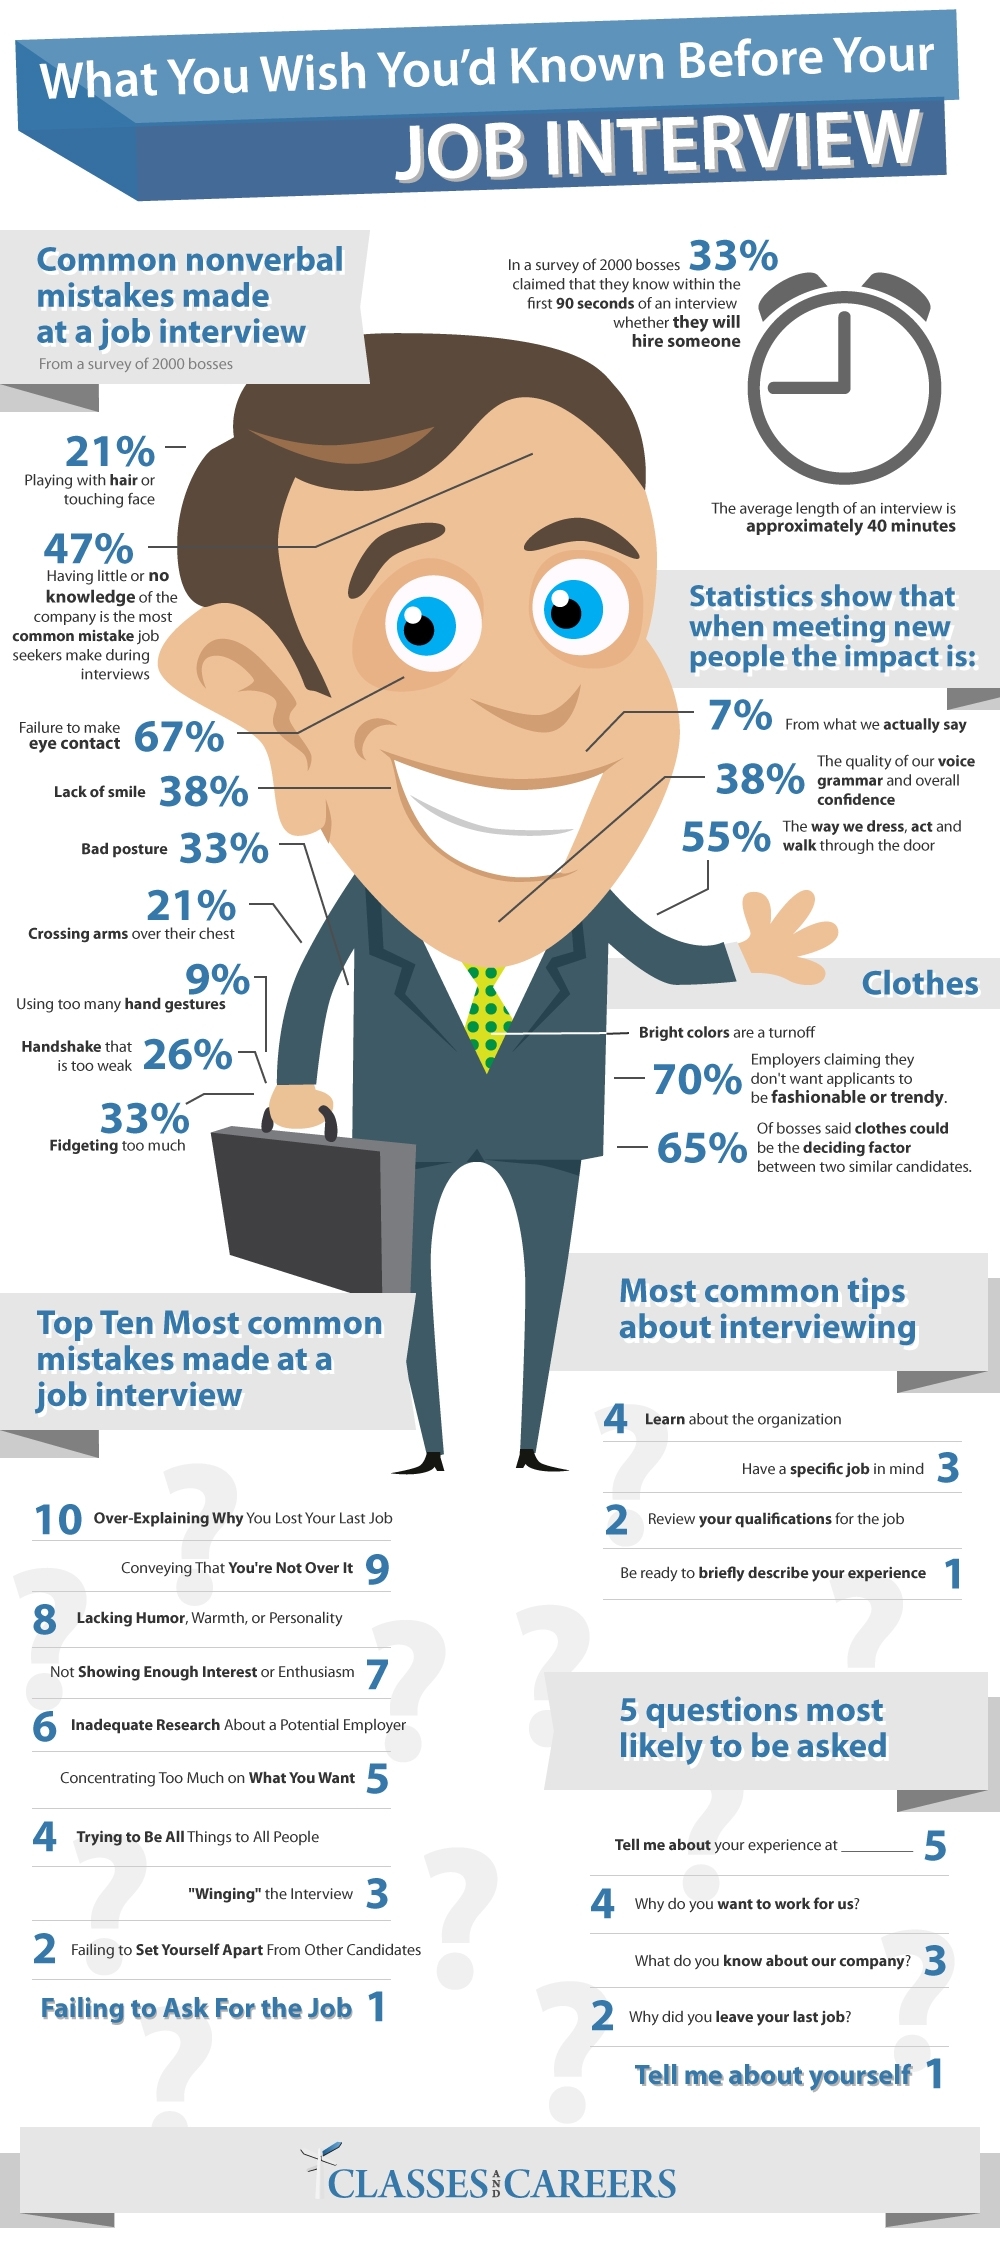 Things you should know before your Job Interview